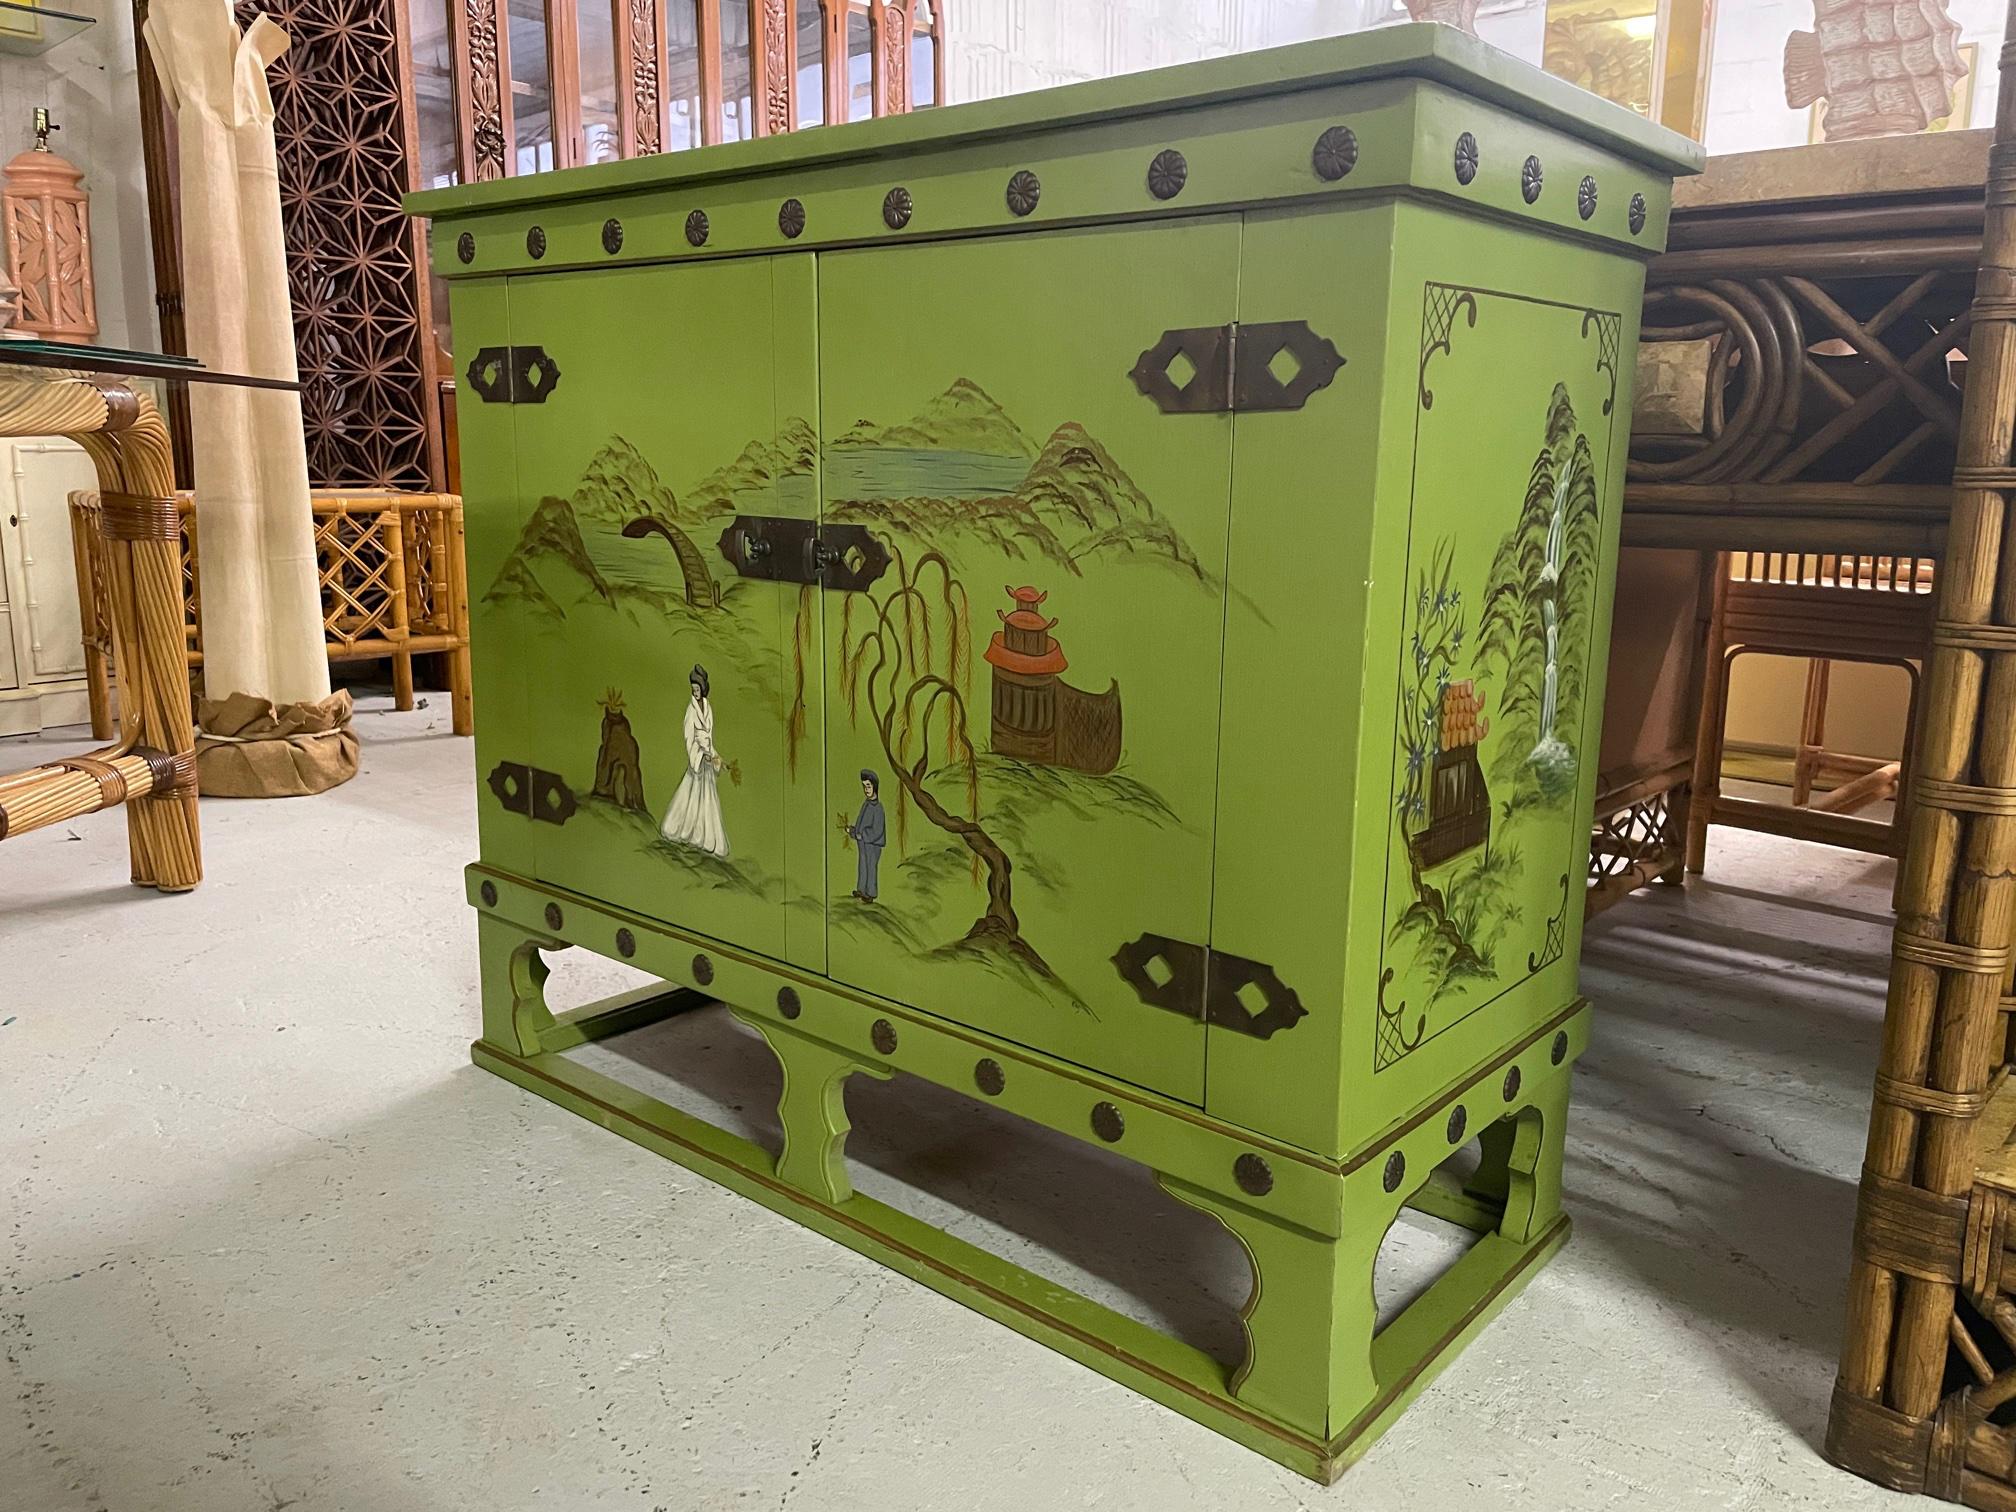 Asian Style bar cabinet features a beautiful green finish with hand painted Chinese scenes and brass hardware. Opens on top as well as double doors revealing storage for bottles and other barware. Good condition with minor imperfections consistent